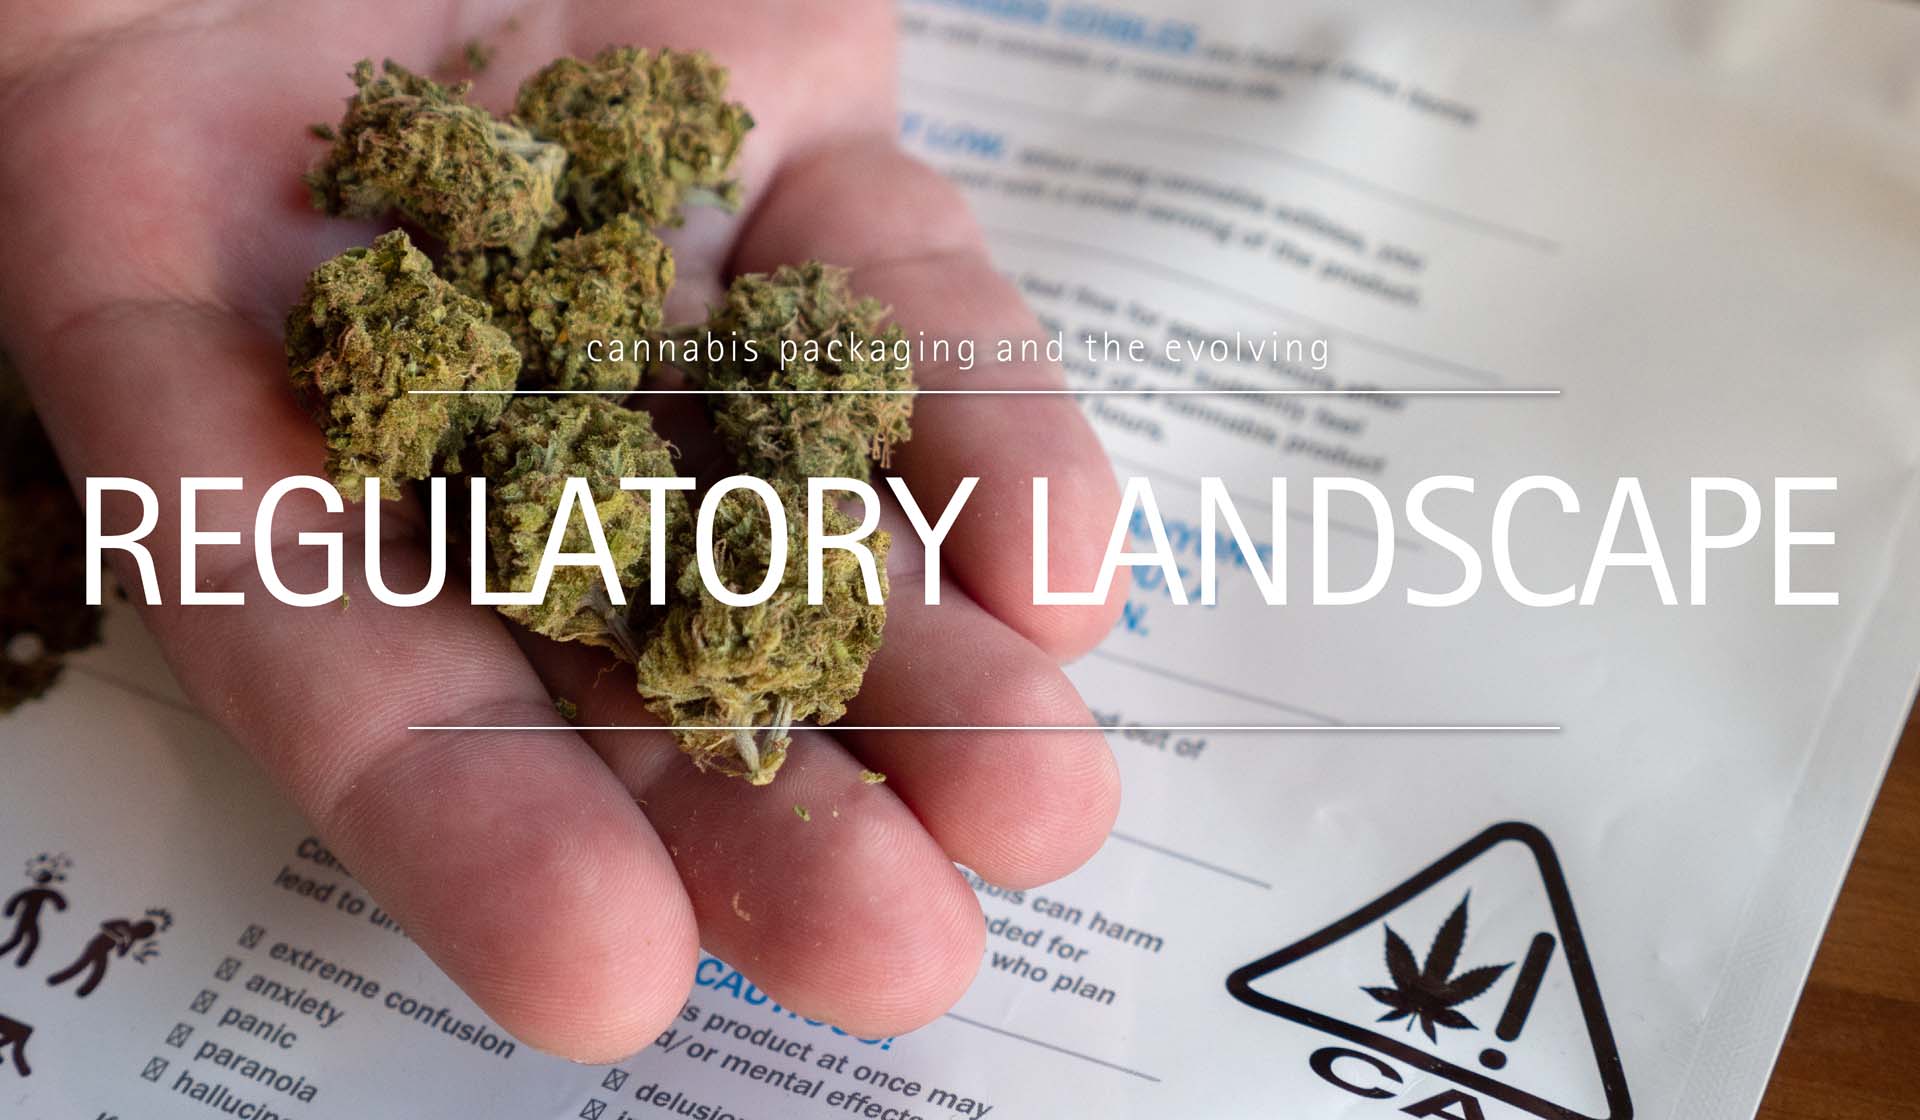 Cannabis Packaging and The Evolving Regulatory Landscape